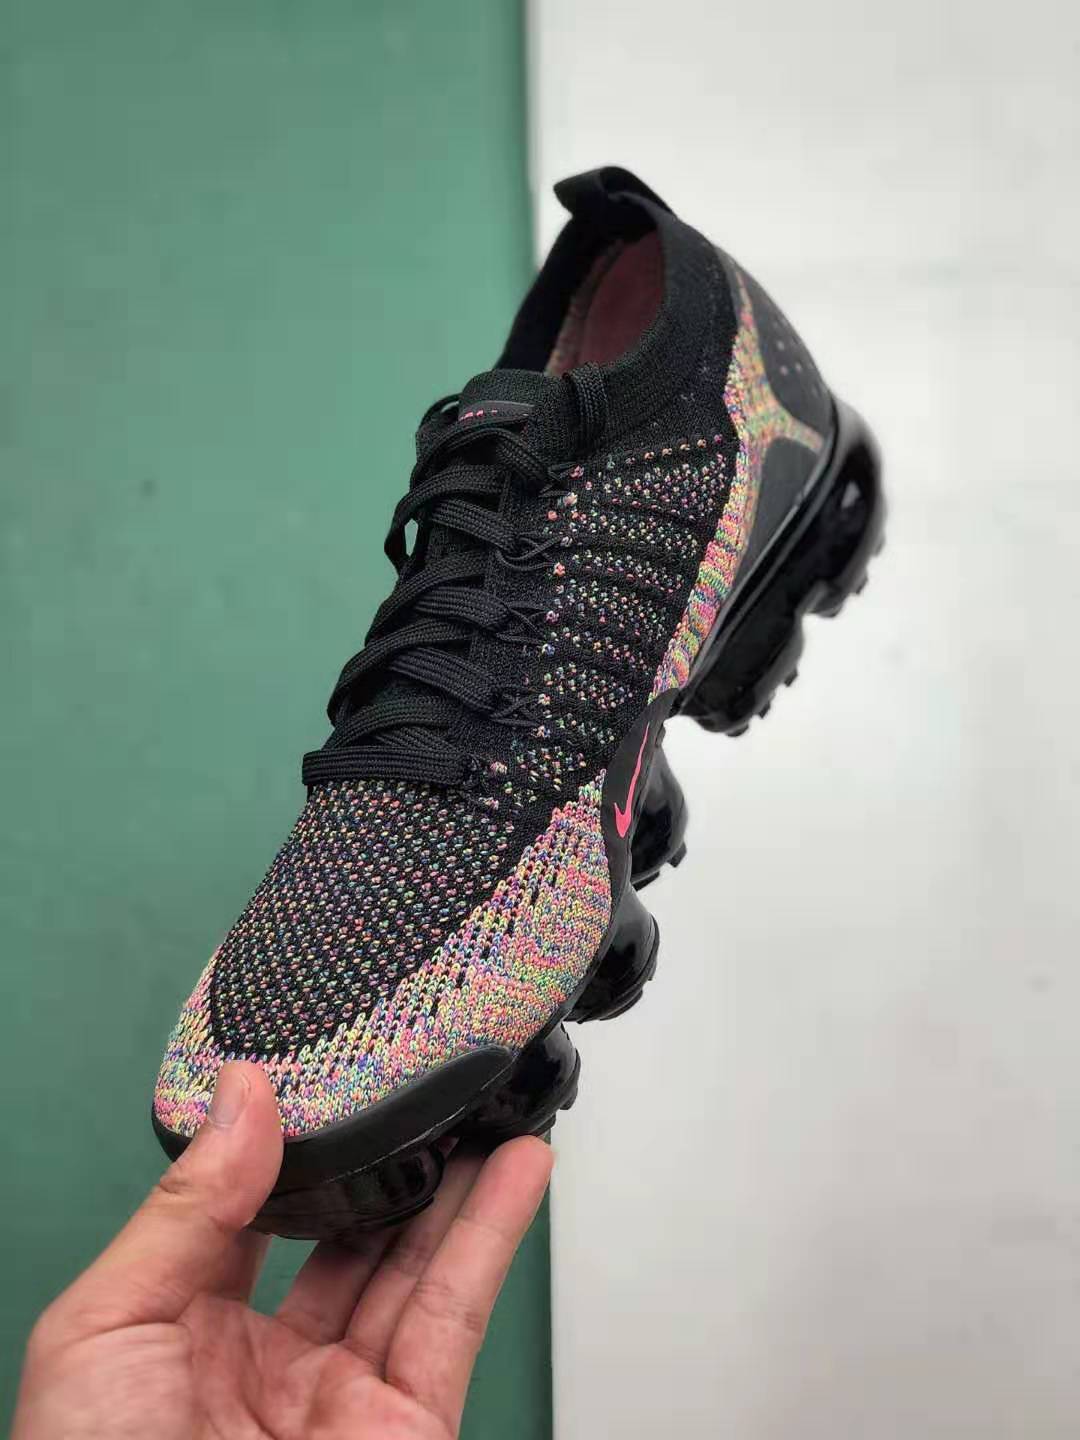 Nike Air VaporMax Flyknit 2 'Black Multi-Color' 942842-017 - Stylish and Versatile Footwear for Unmatched Comfort